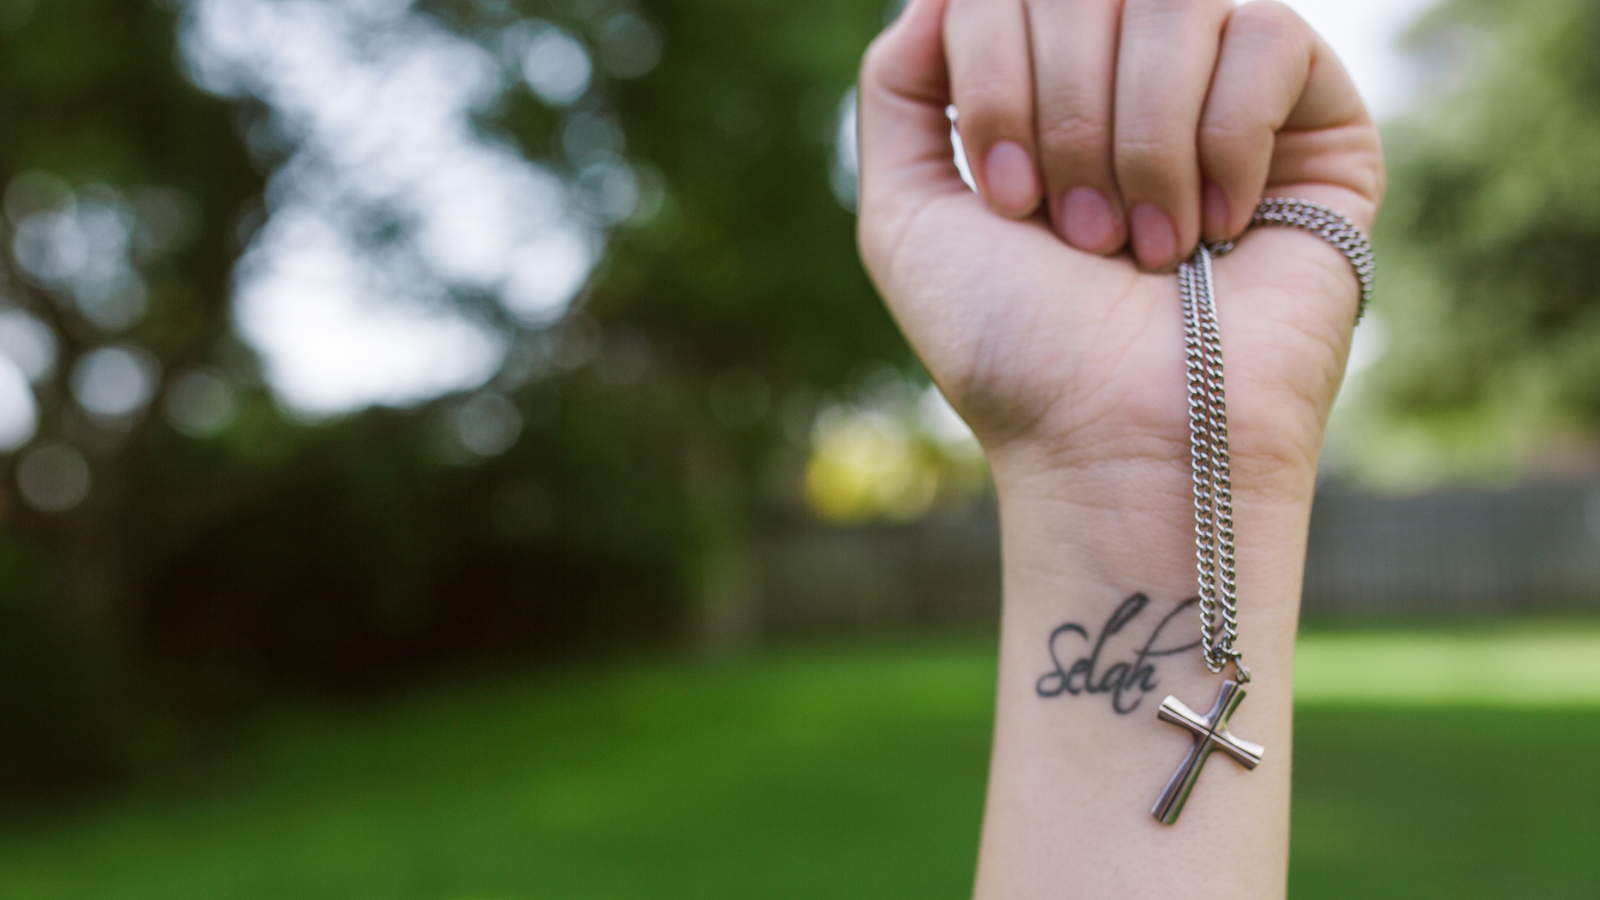 hand with selah tattoo holding cross necklace